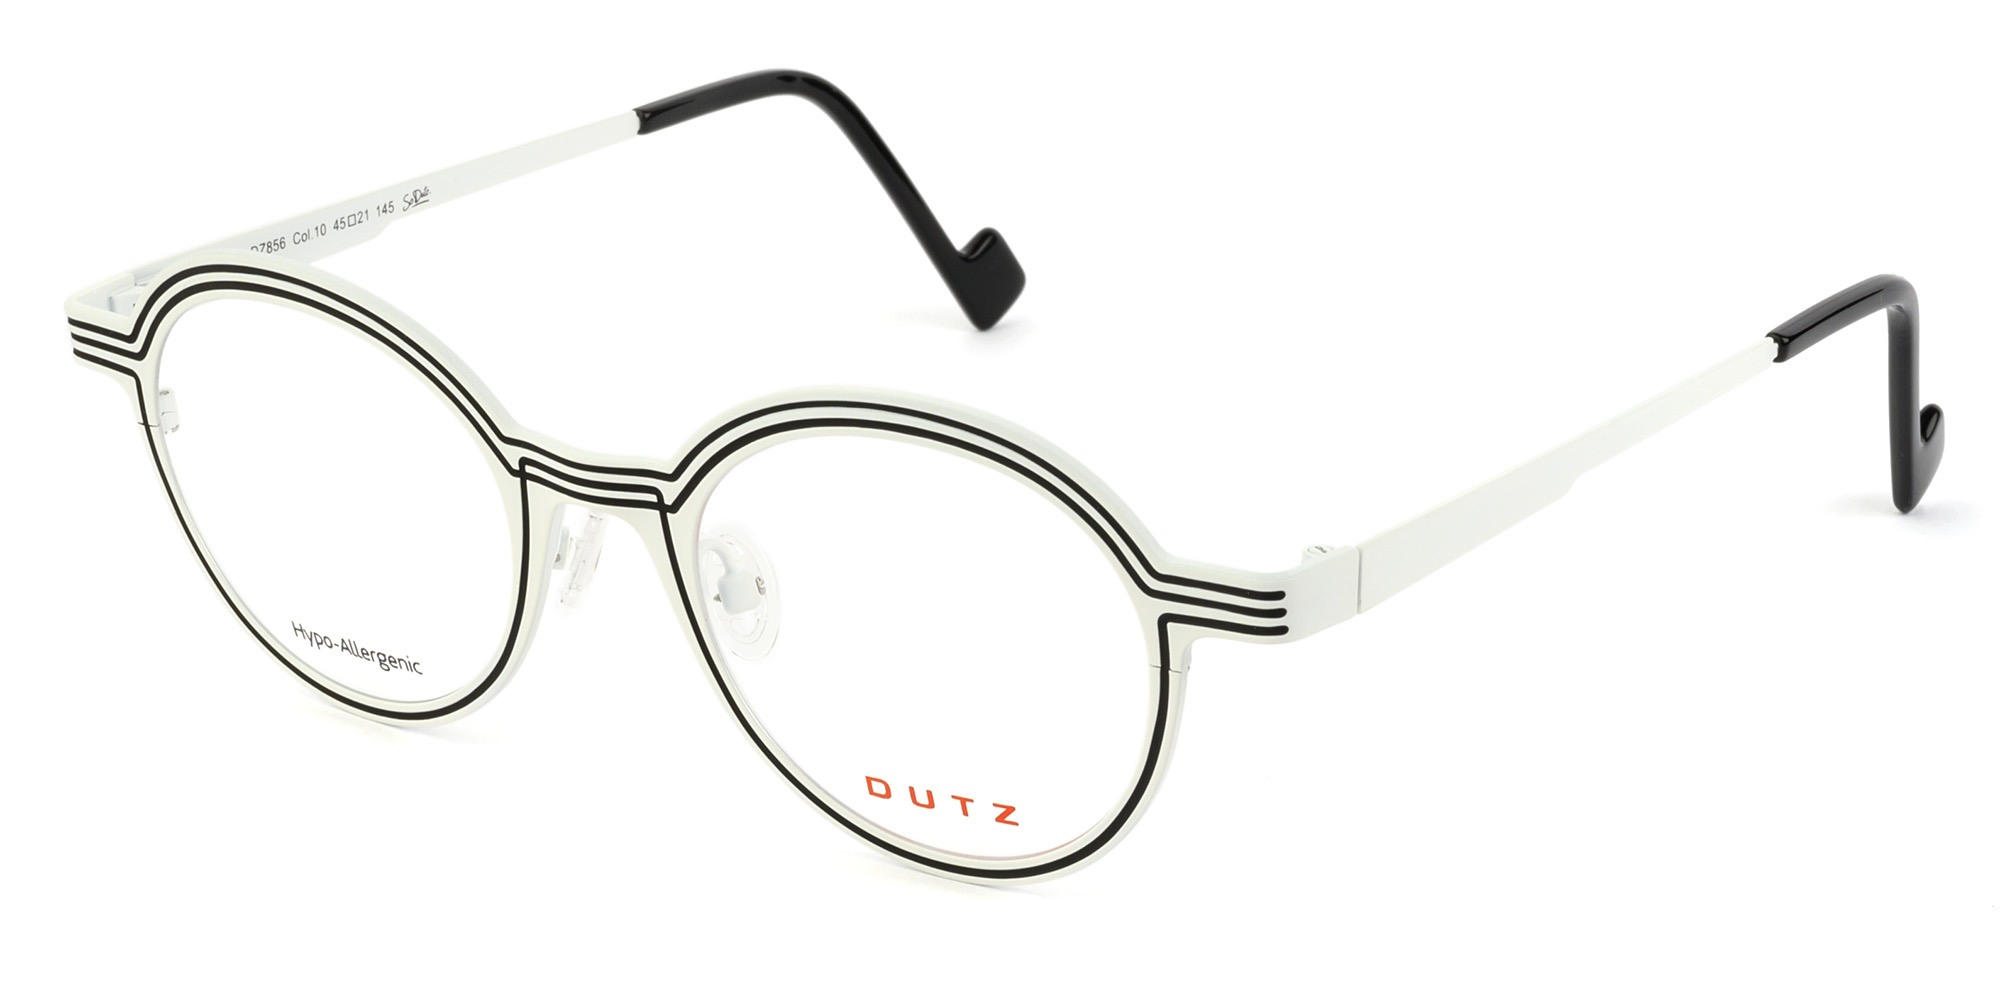 A trendy, bi-color, white combined with black, metallic frame and temples and black acetate temple tips